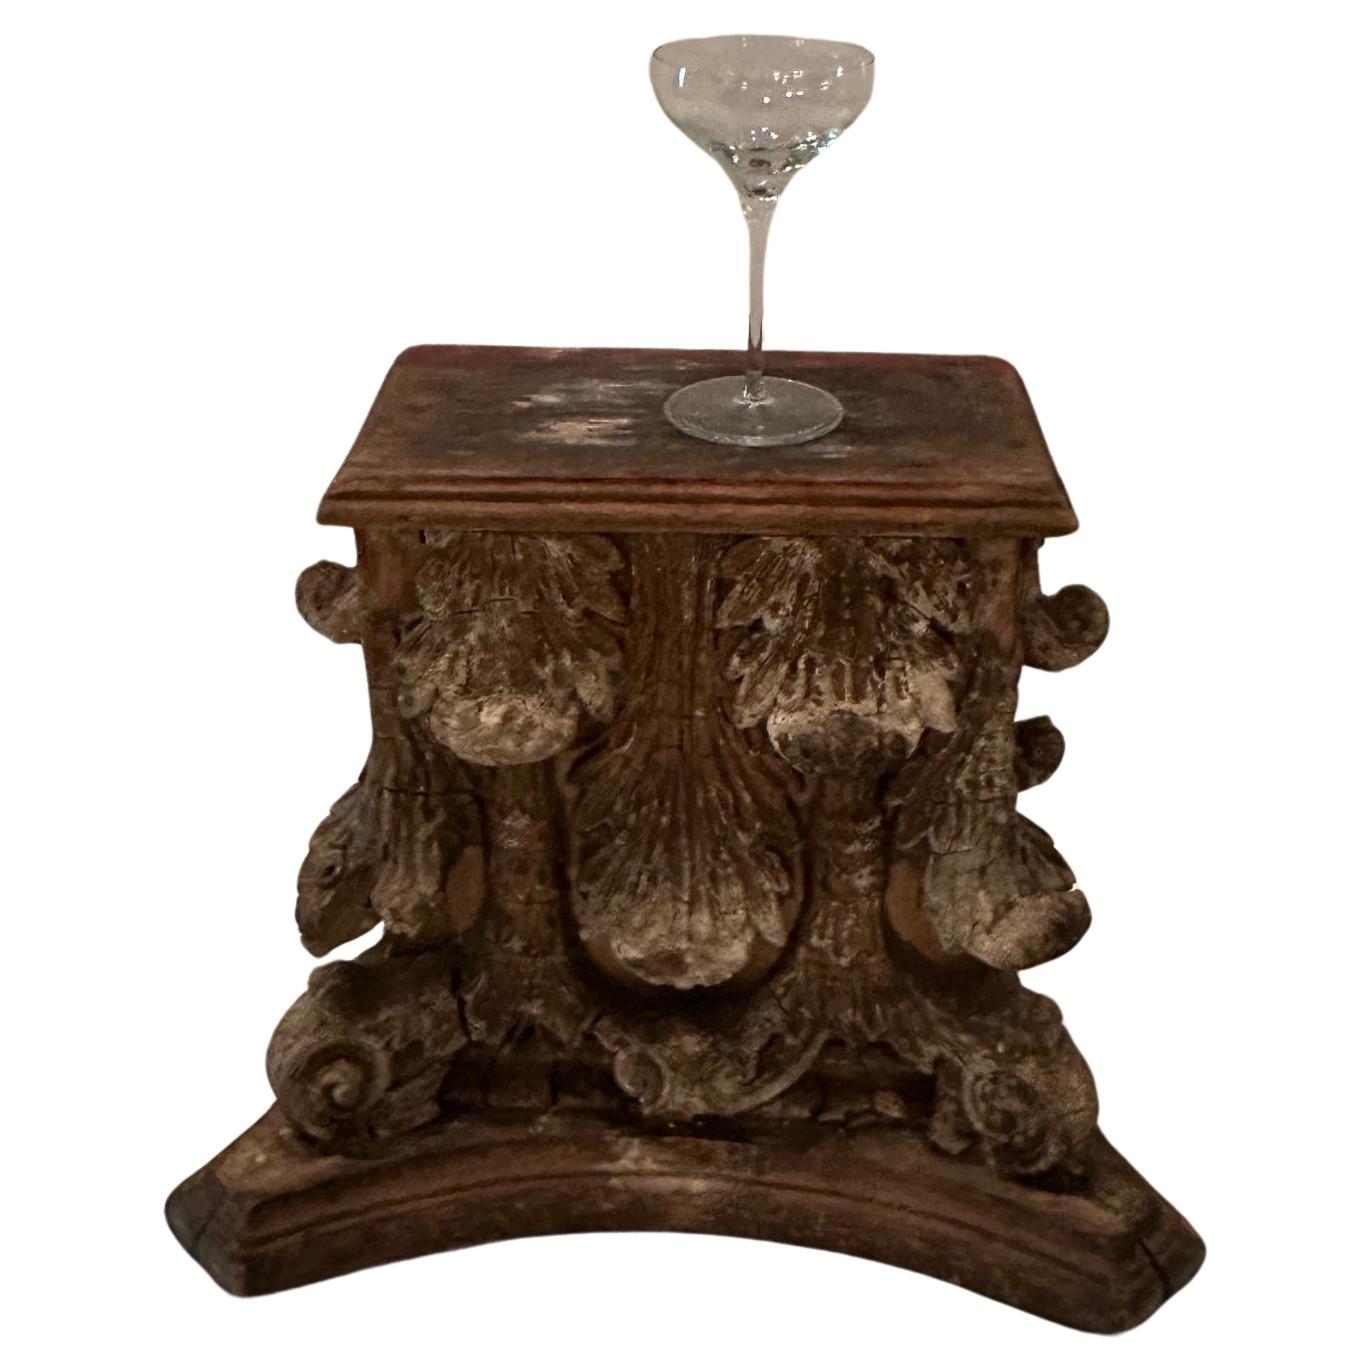 One of a kind antique carved distressed wooden fragment from a Corinthian column, salvaged and functional as a character rich architectural end table.